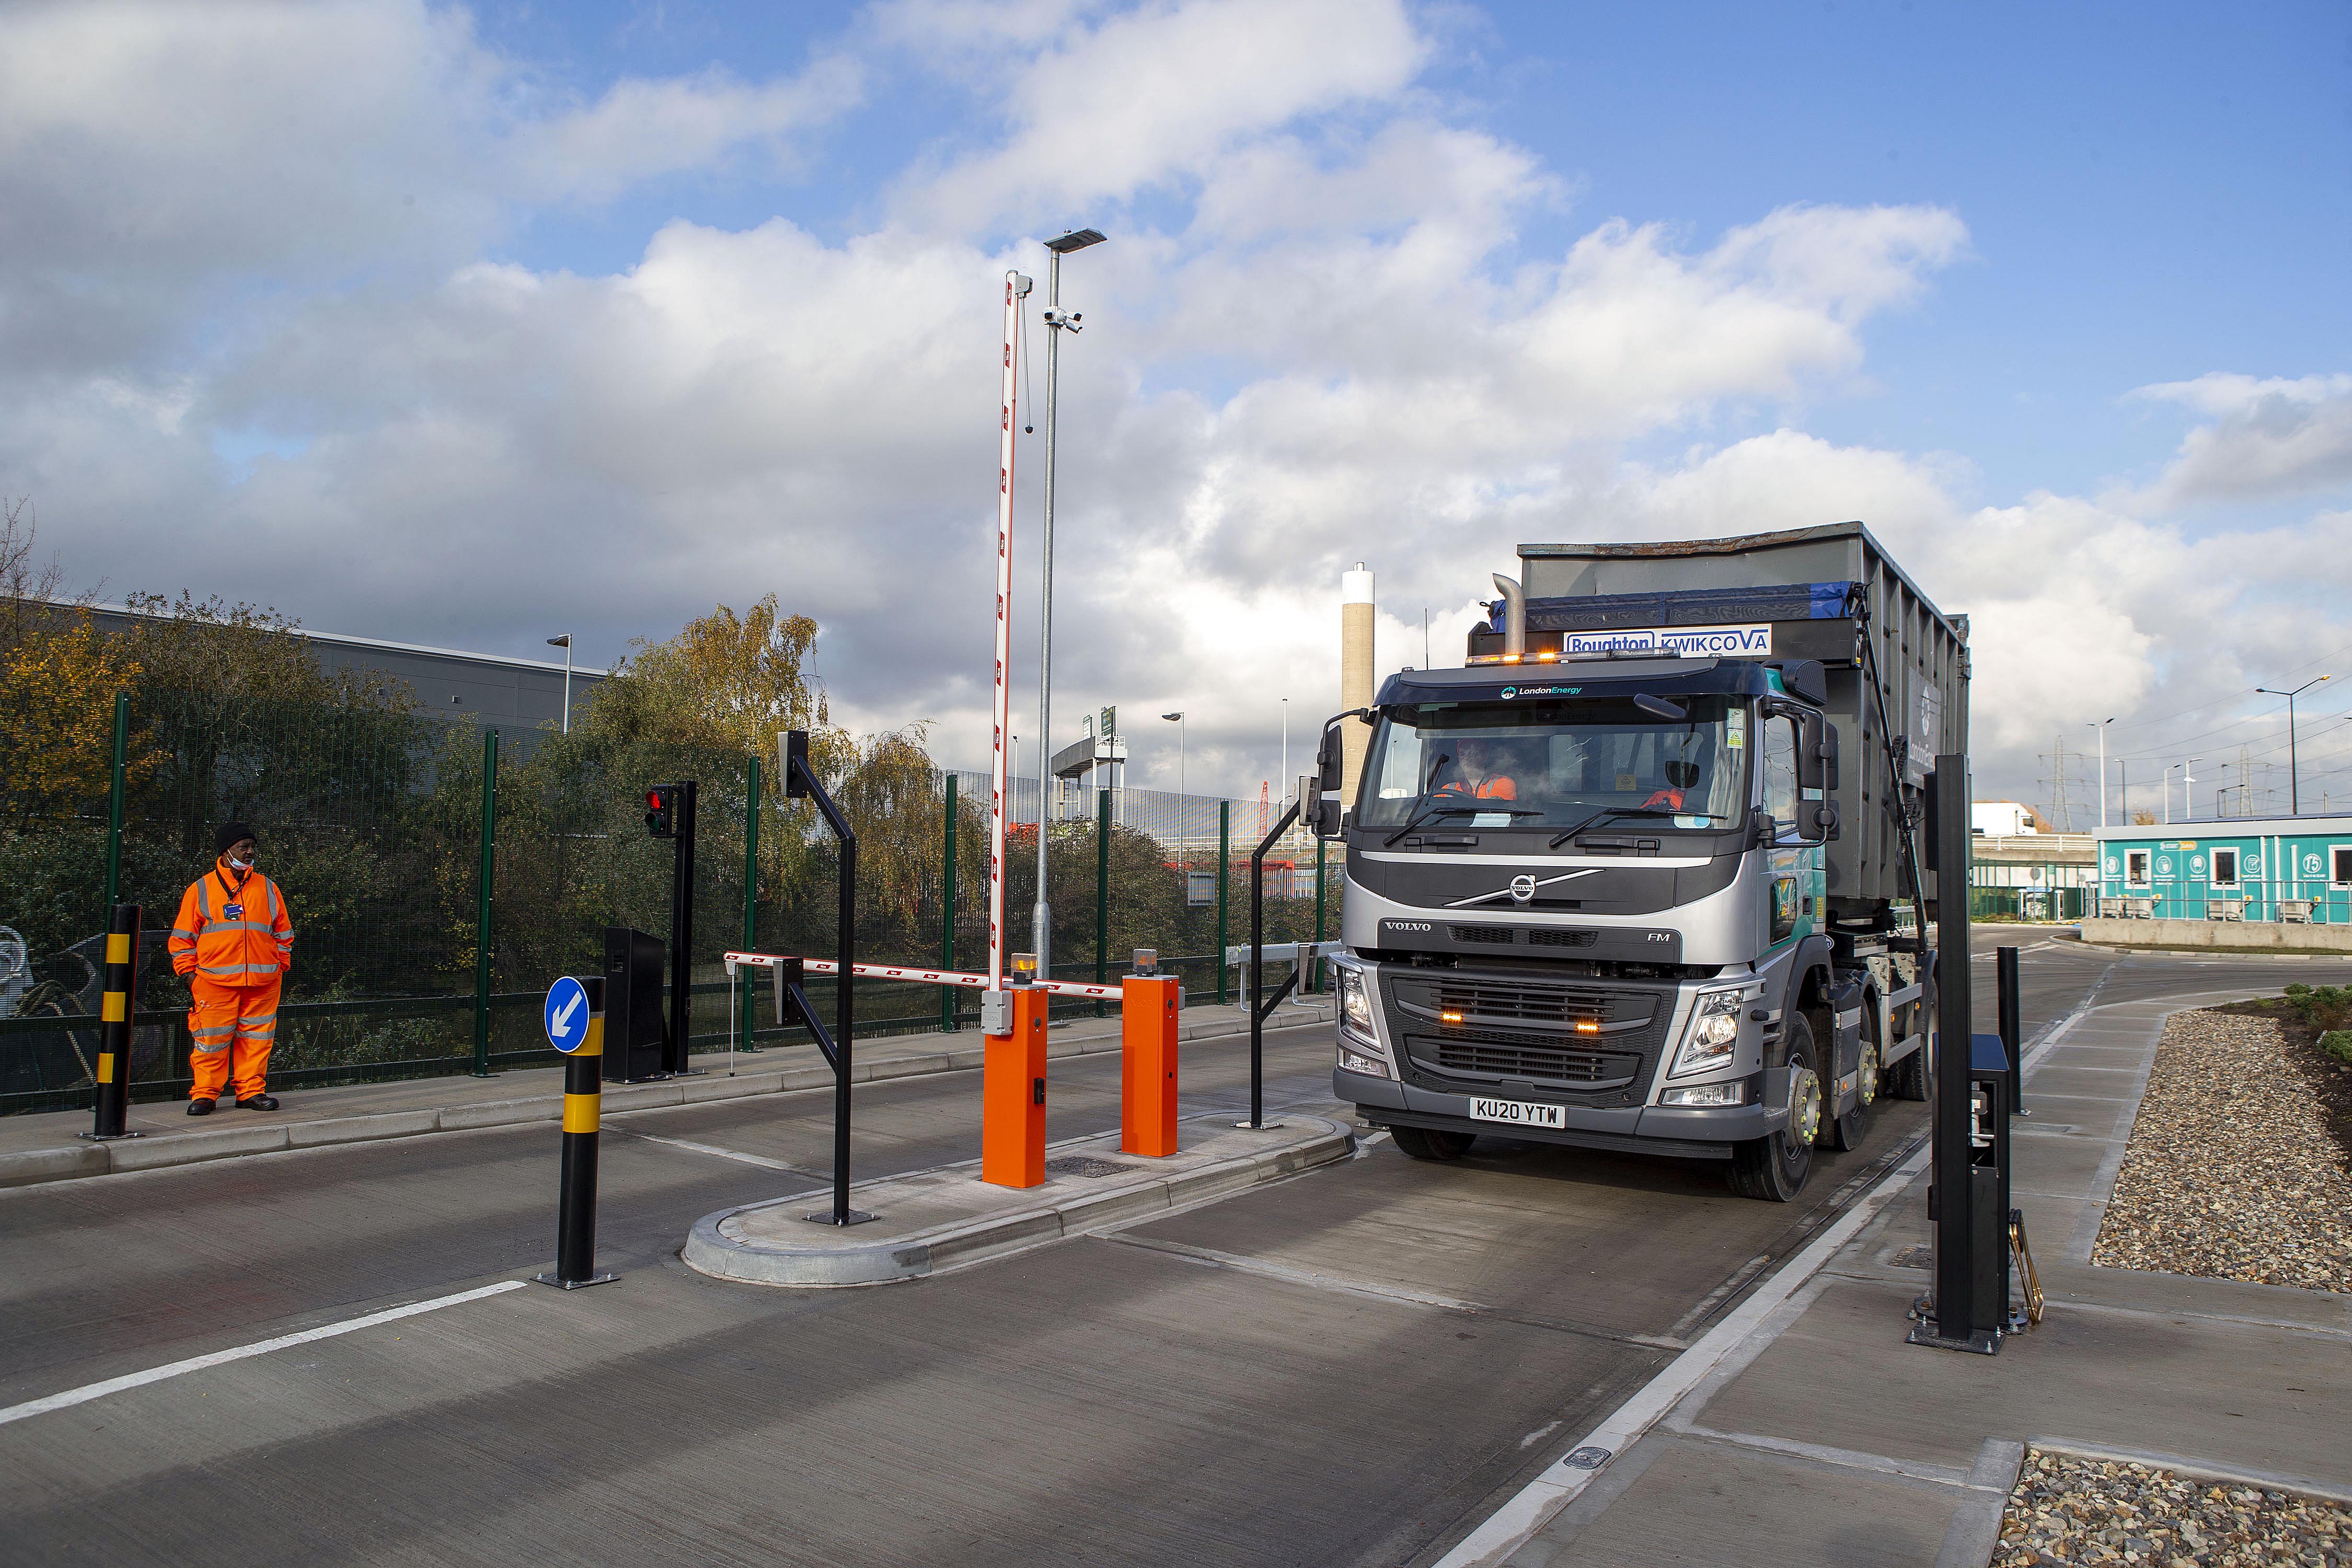 Entry and exit point for LondonEnergy vehicles into and out of the new Transport Yard